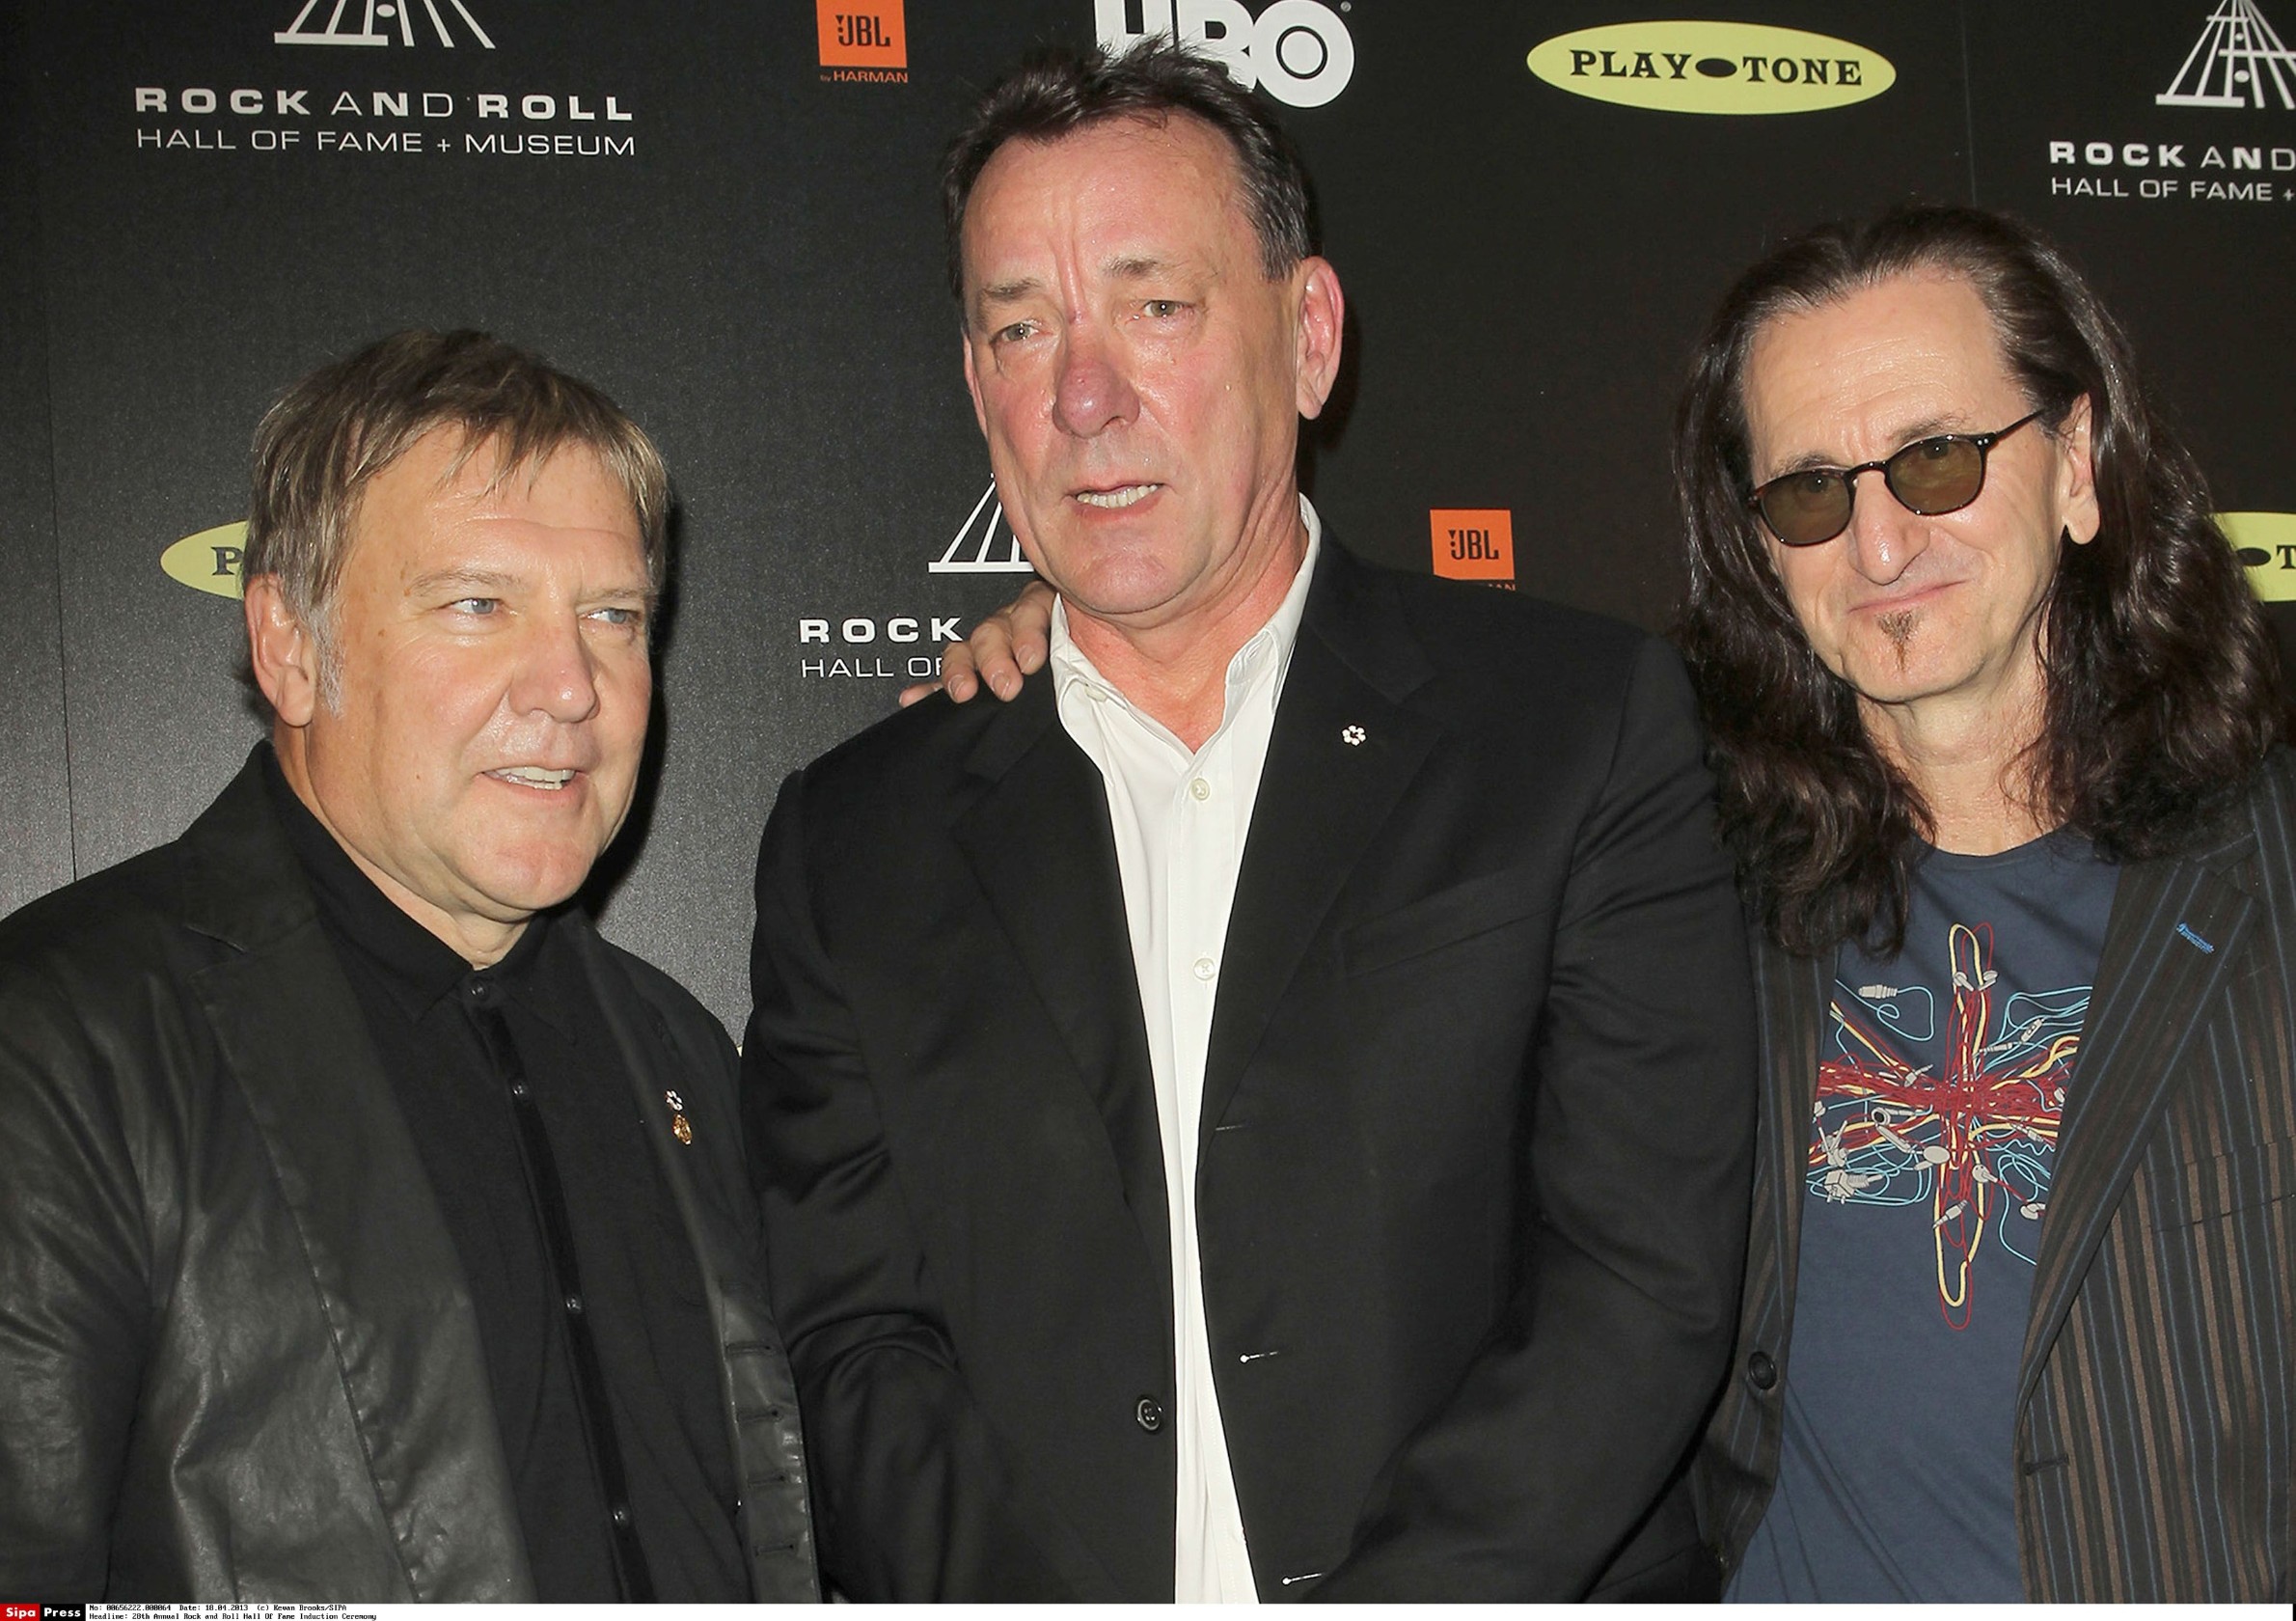 18 April 2013 - Los Angeles, California - Alex Lifeson, Neil Peart and Geddy Lee of Rush. 28th Annual Rock and Roll Hall Of Fame Induction Ceremony held at Nokia Theatre L.A. Live. Photo Credit: Kevan Brooks/AdMedia/ADMEDIA_adm_RockHall2013Induction_KB_064/Credit:Kevan Brooks/SIPA/1304191645, Image: 232150276, License: Rights-managed, Restrictions: , Model Release: no, Credit line: Kevan Brooks / Sipa Press / Profimedia